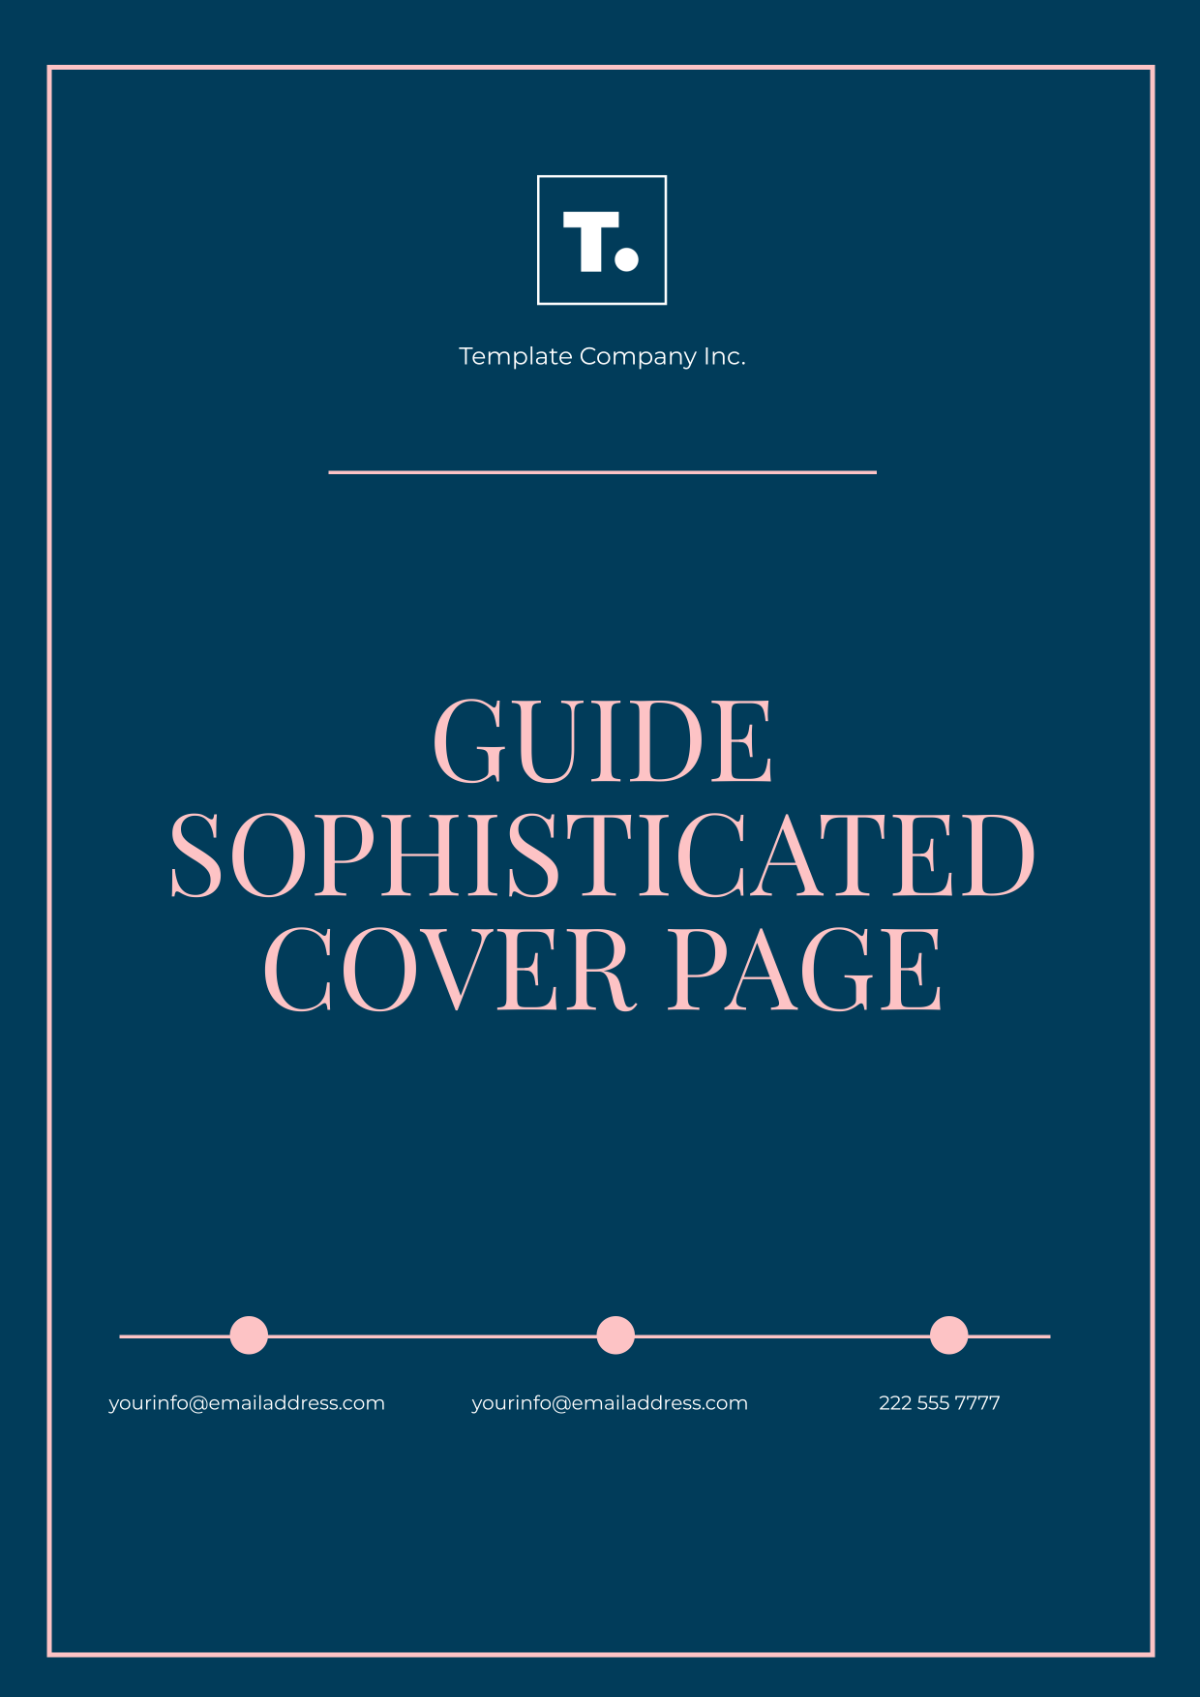 Guide Sophisticated Cover Page Template